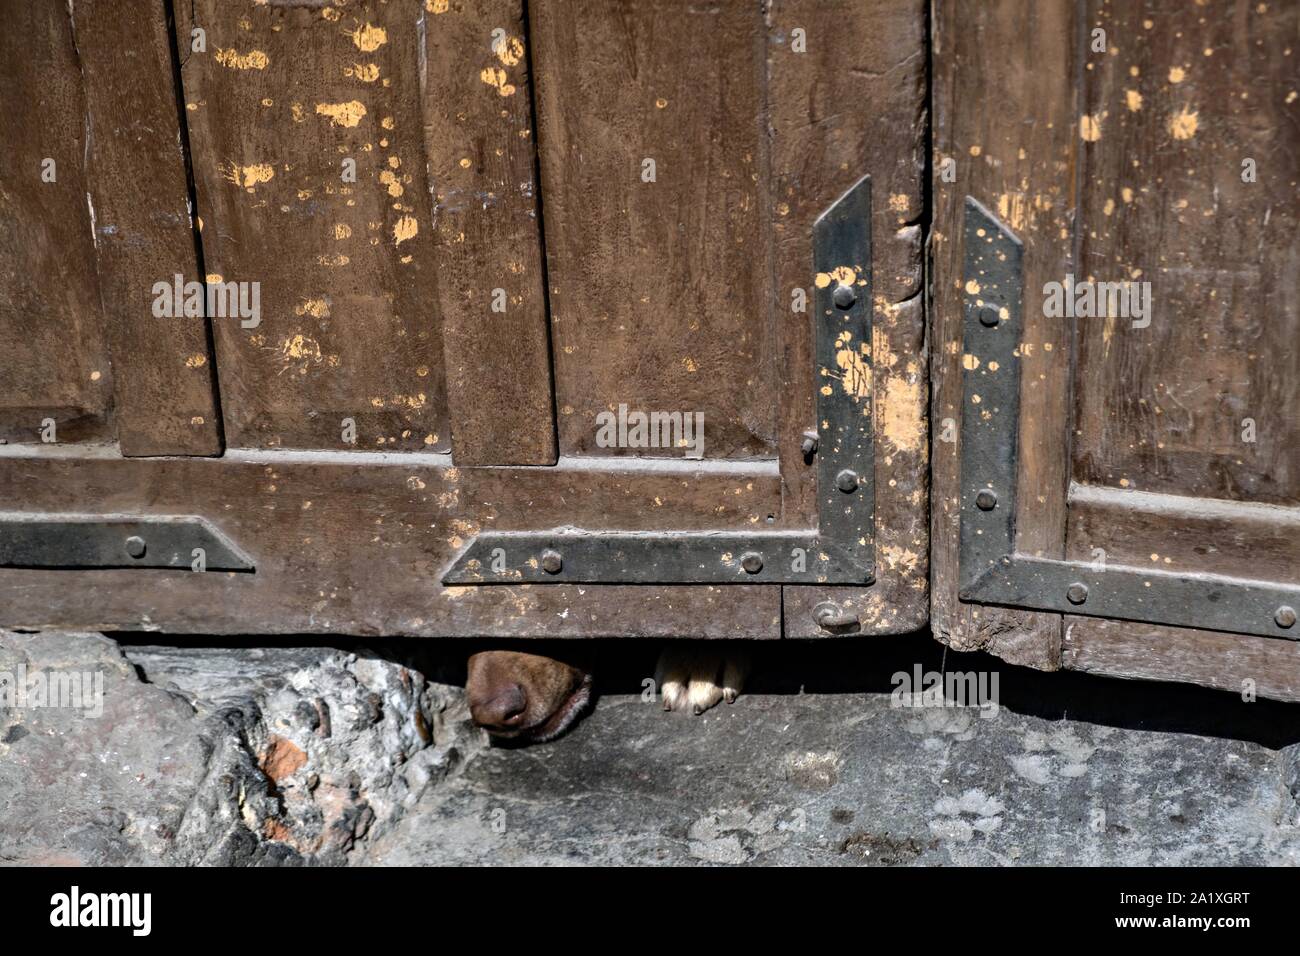 A guard dog sticks his nose under wooden doors at a private residence on Aparicio Street in the historic center of San Miguel de Allende, Guanajuato, Mexico. Stock Photo